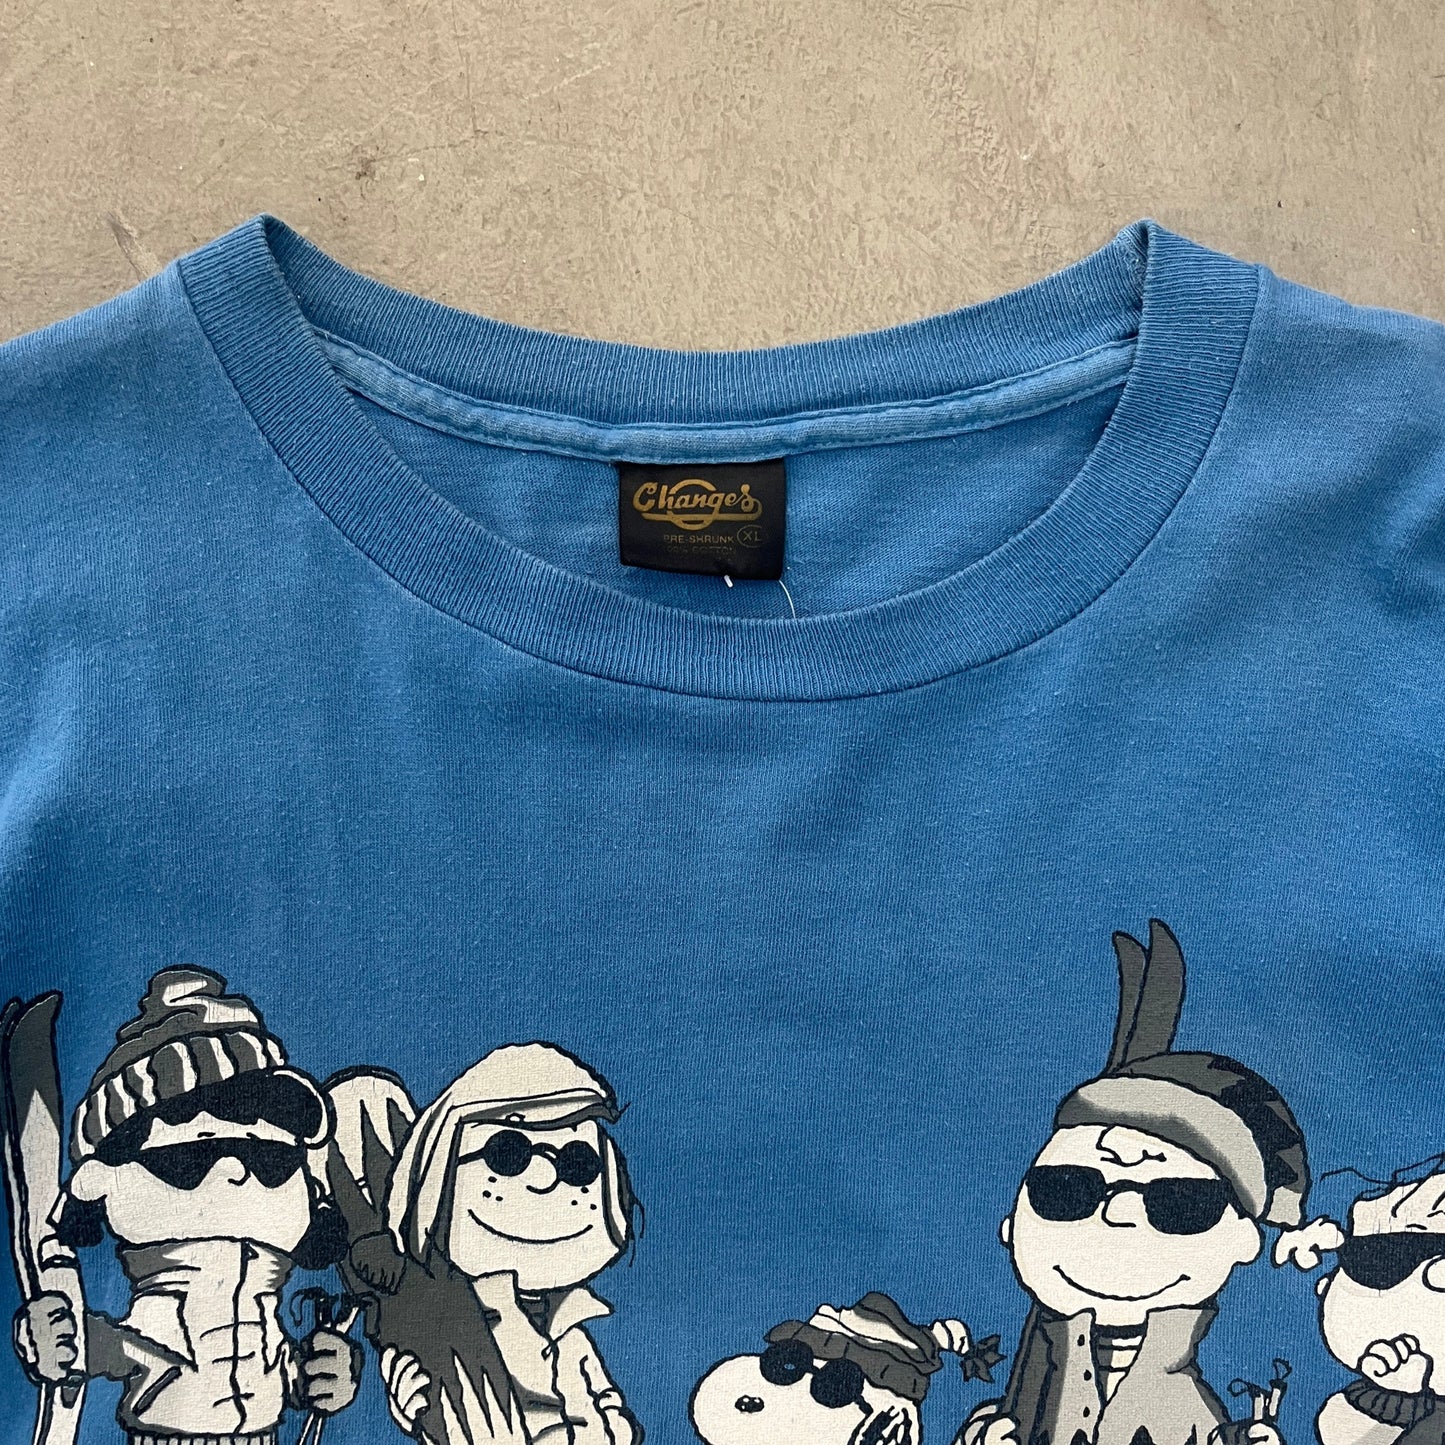 PEANUTS SNOOPY & FREINDS 90s [XL]